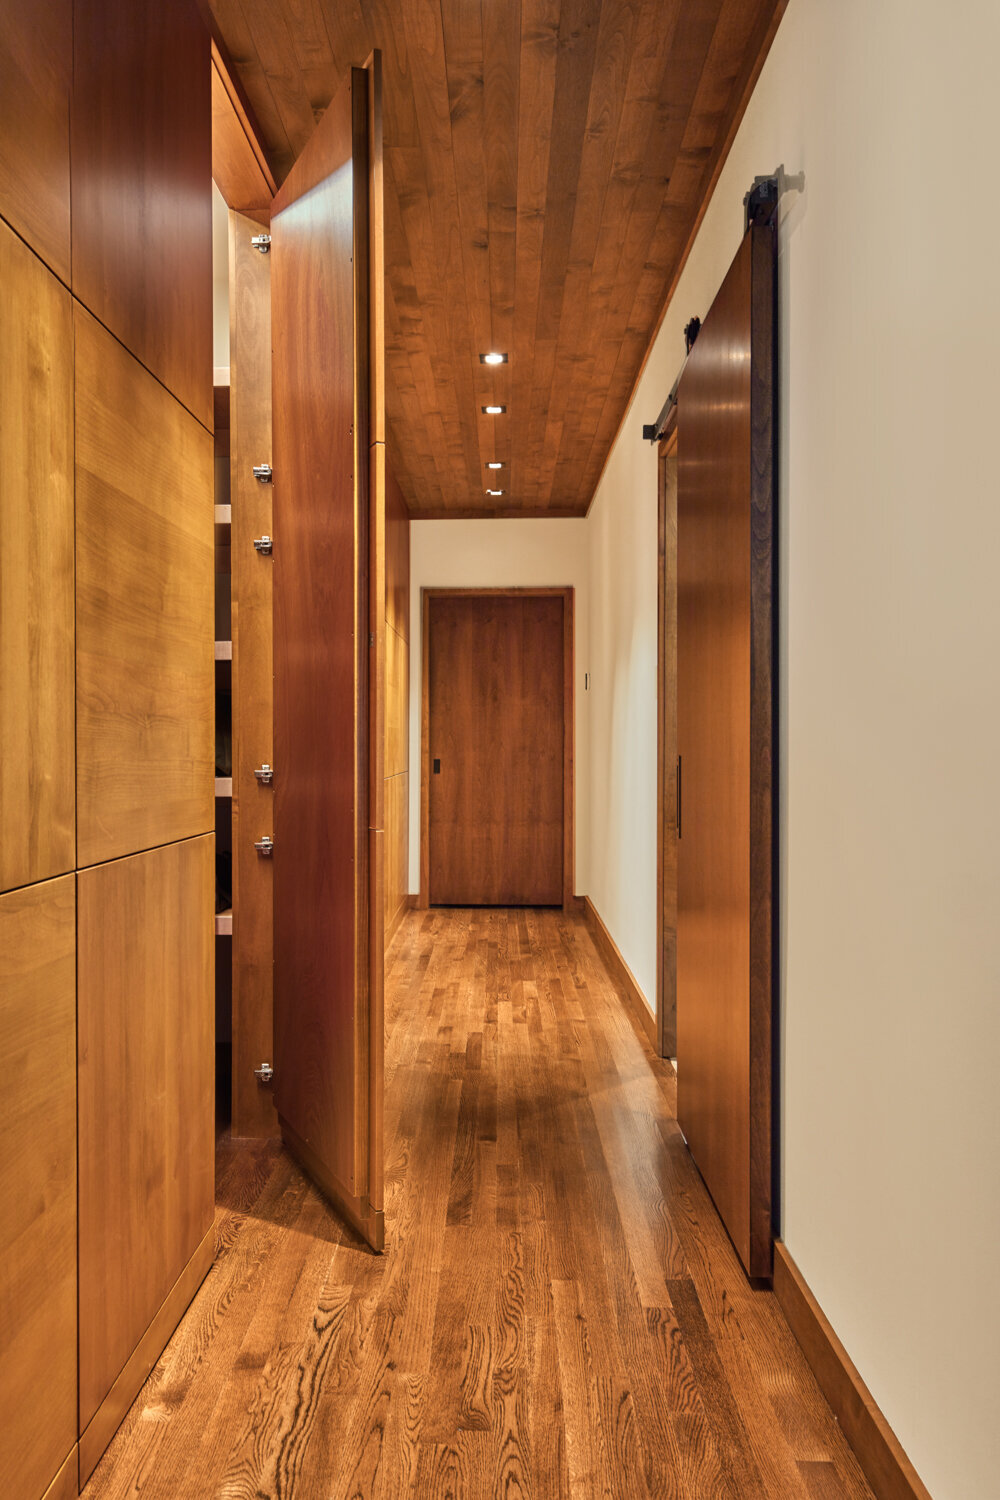 Panageries Residential Interior Design | Pacific NW Modern Dwelling Chocolate Hallway with a hidden door